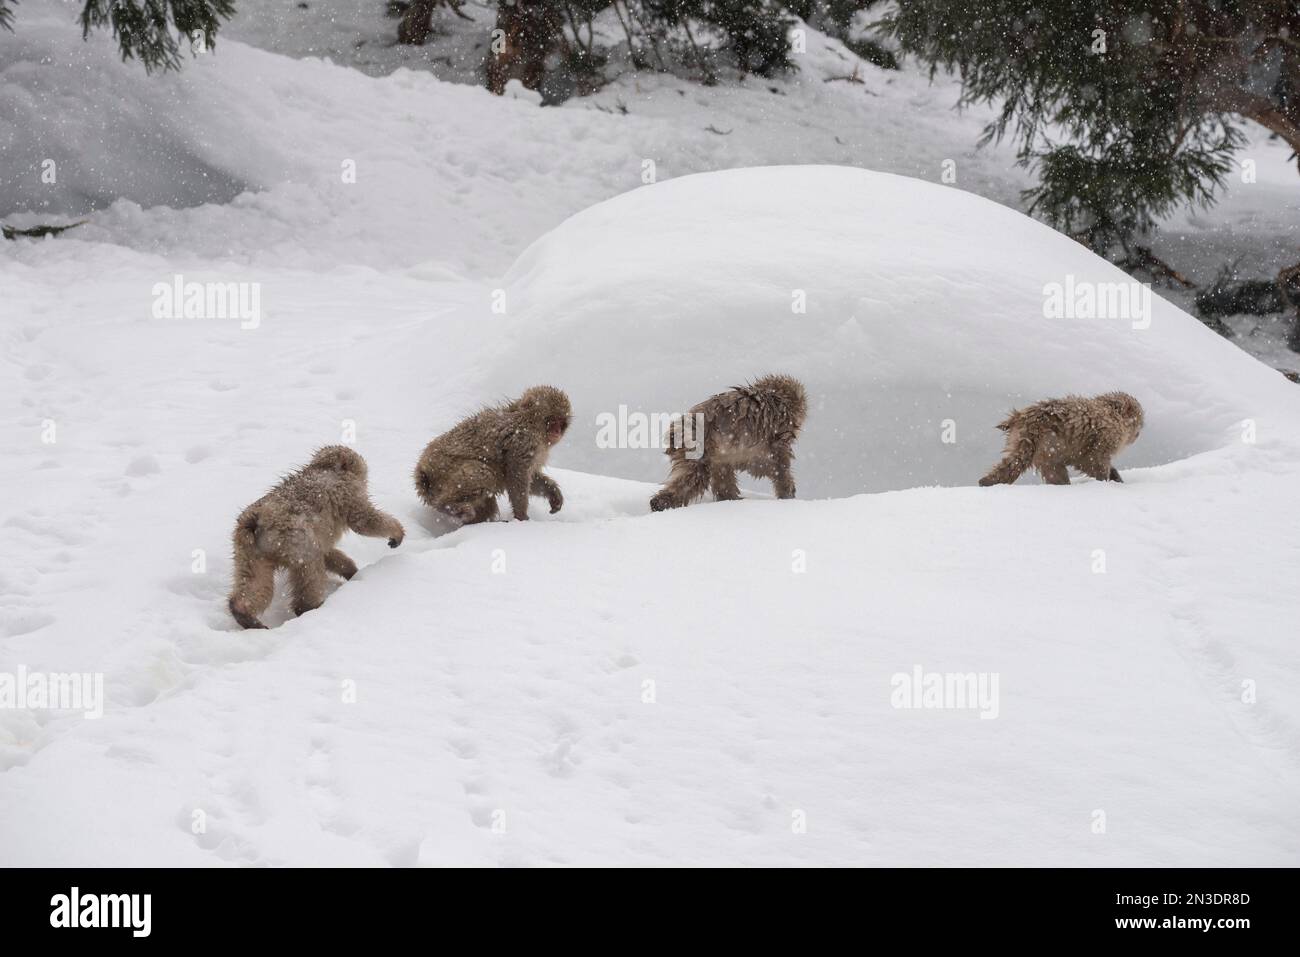 Troop of Japanese Macaque Monkeys (Macaca fuscata), often referred to as Snow Monkey, walking in a row across the snowy landscape in the Jigokudani... Stock Photo